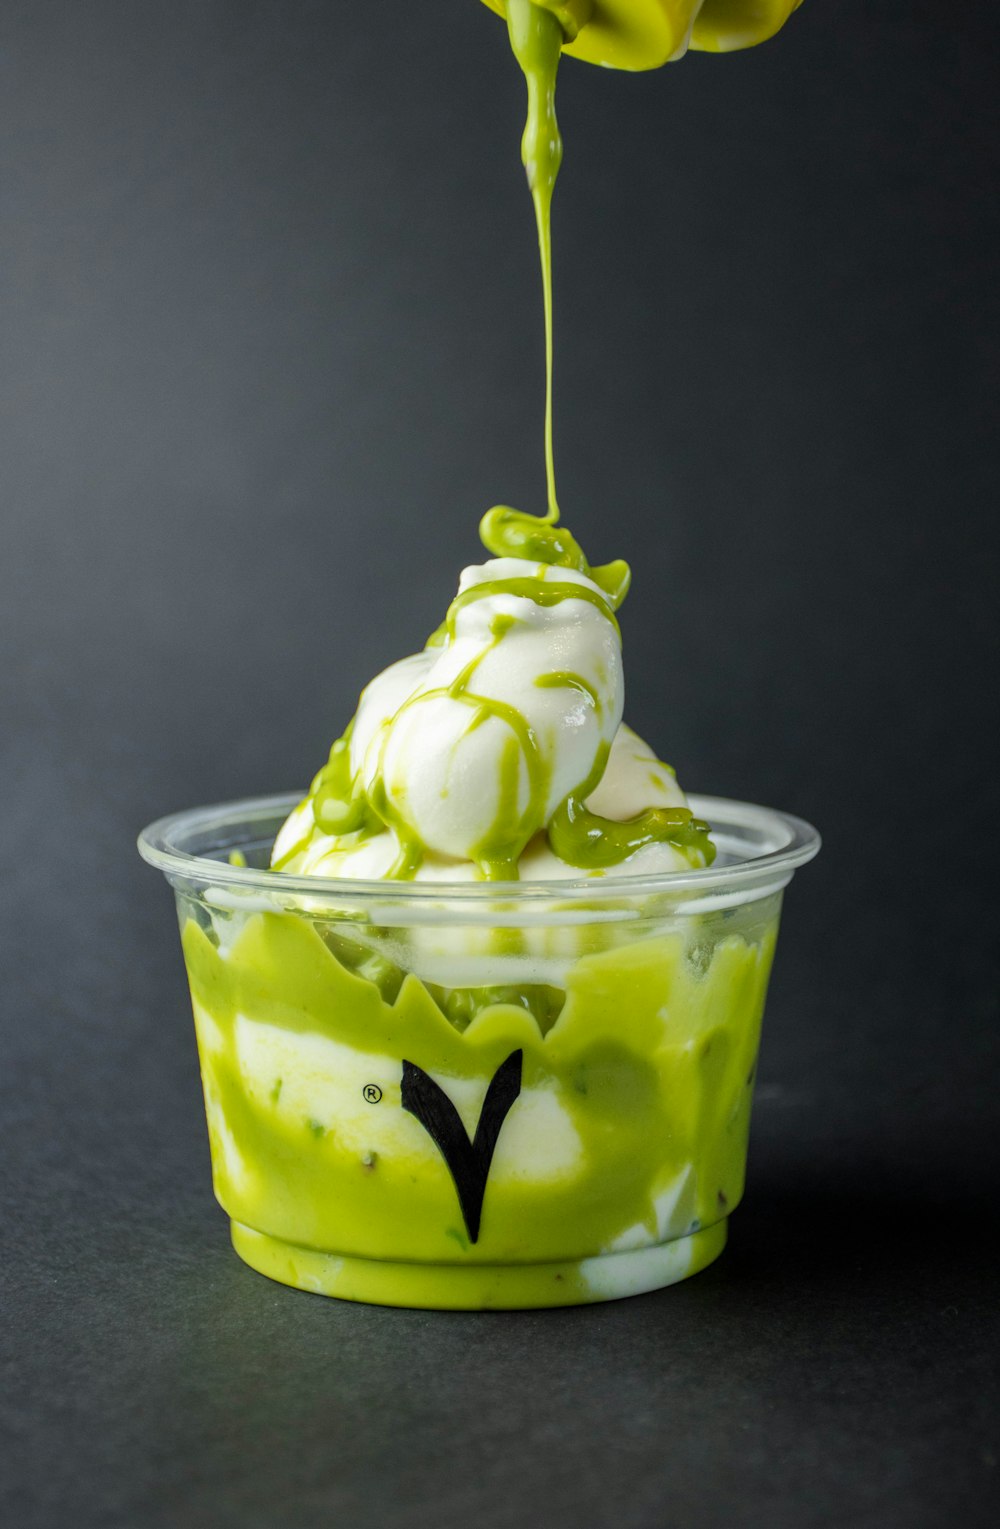 green ice cream in clear glass cup